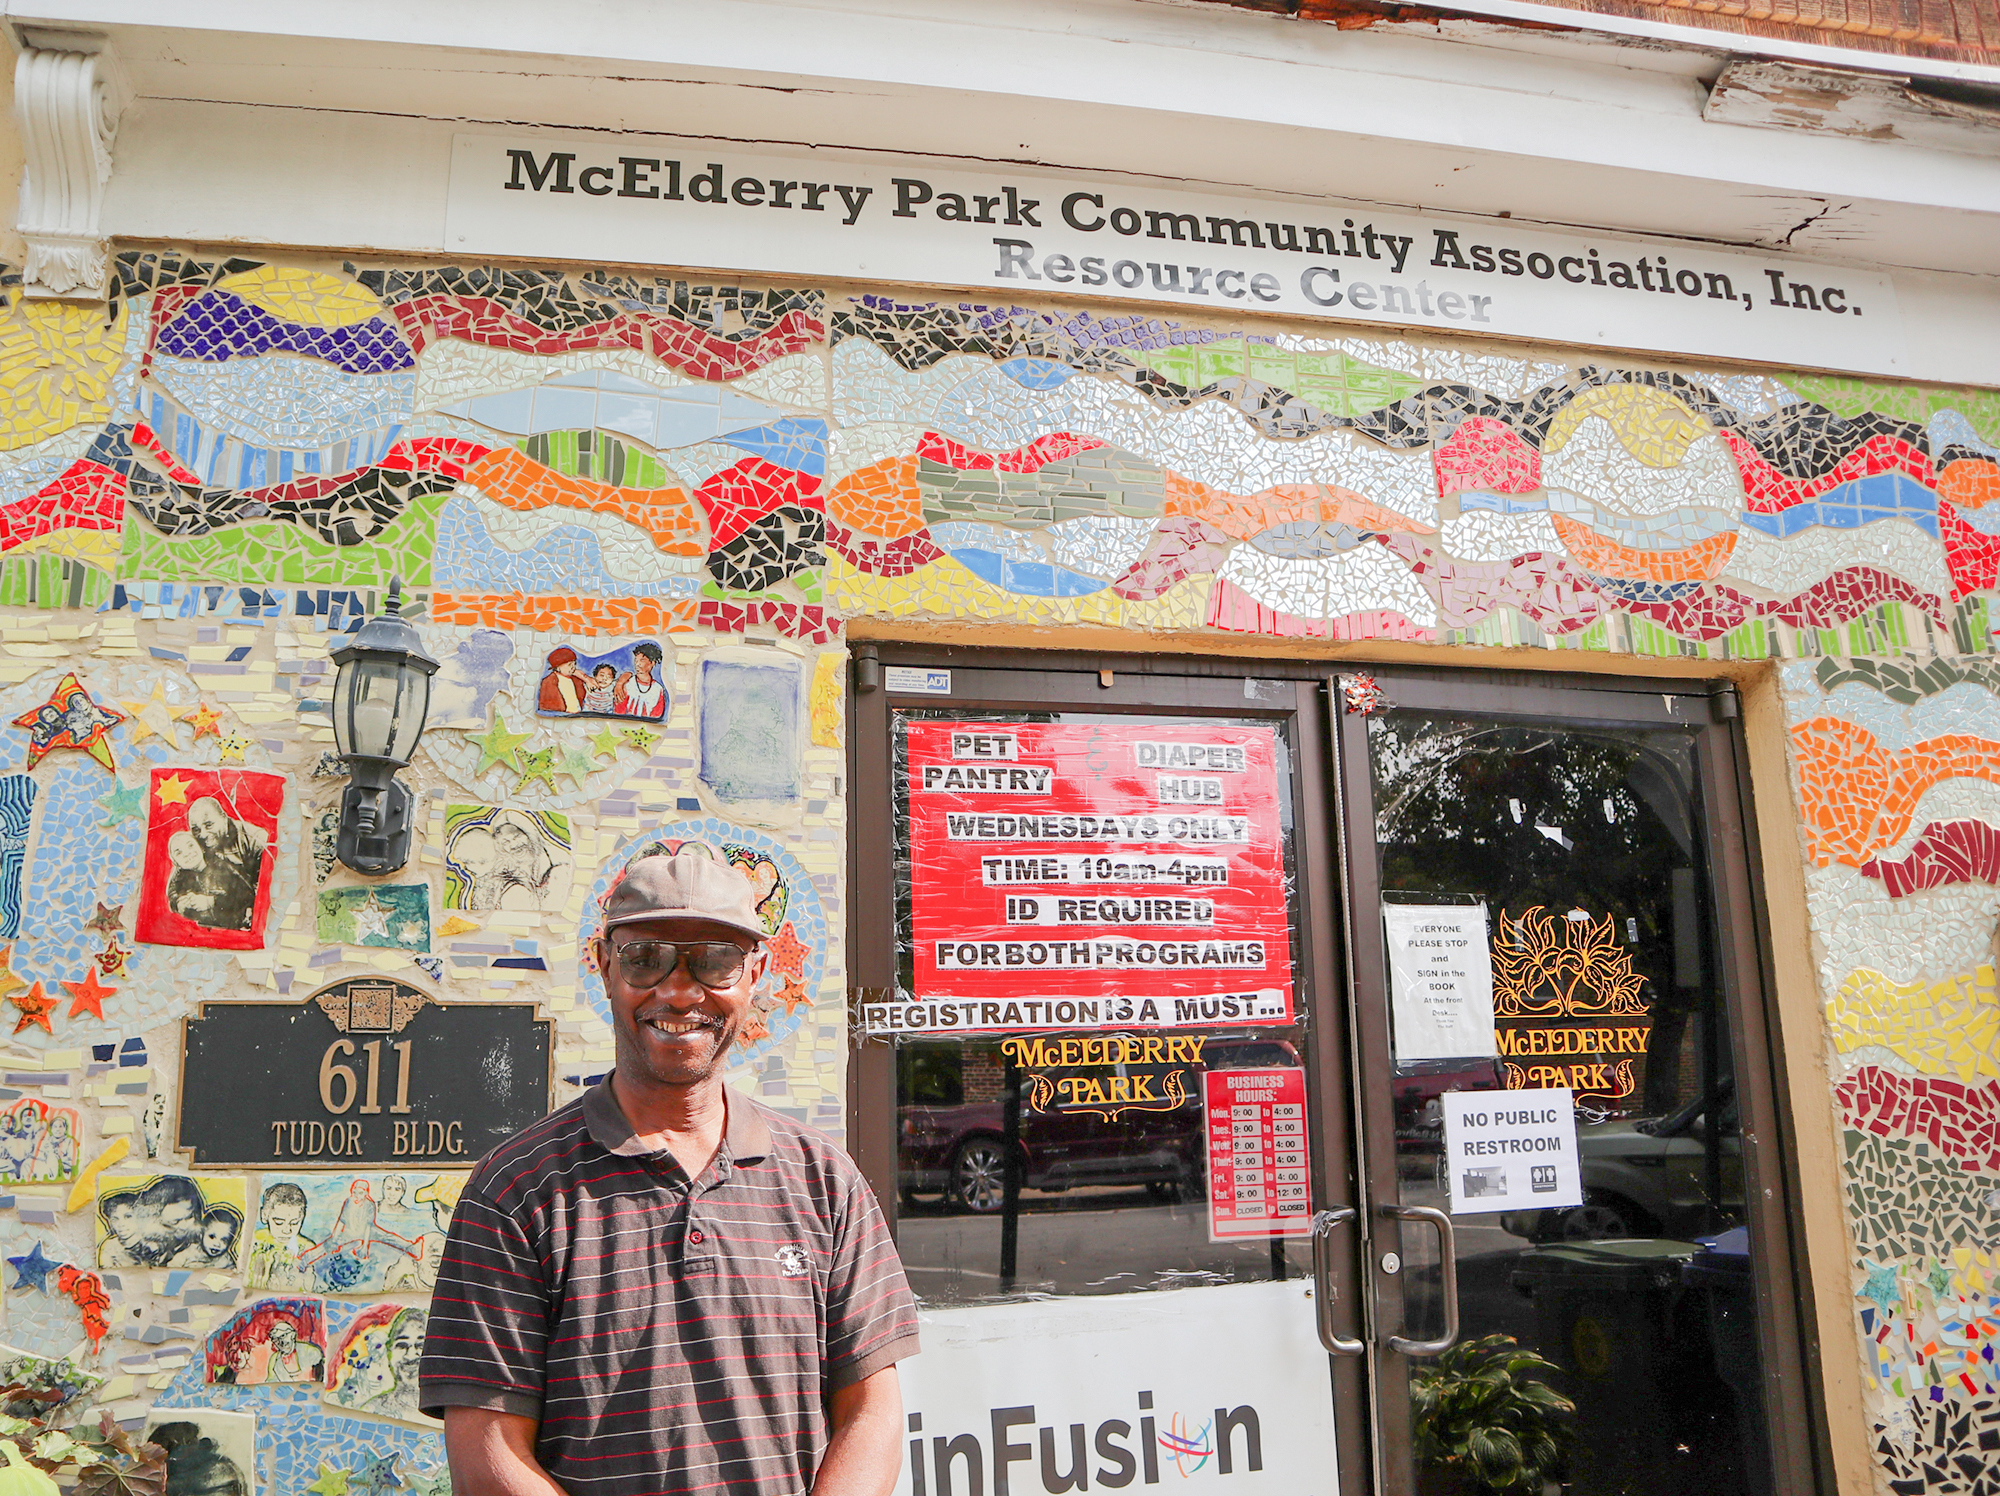 Ernest Smith, 62, stands in front of the McElderry Park Community Association's resource center on North Montford Avenue. (Photo: Esther Frances/Capital News Service)